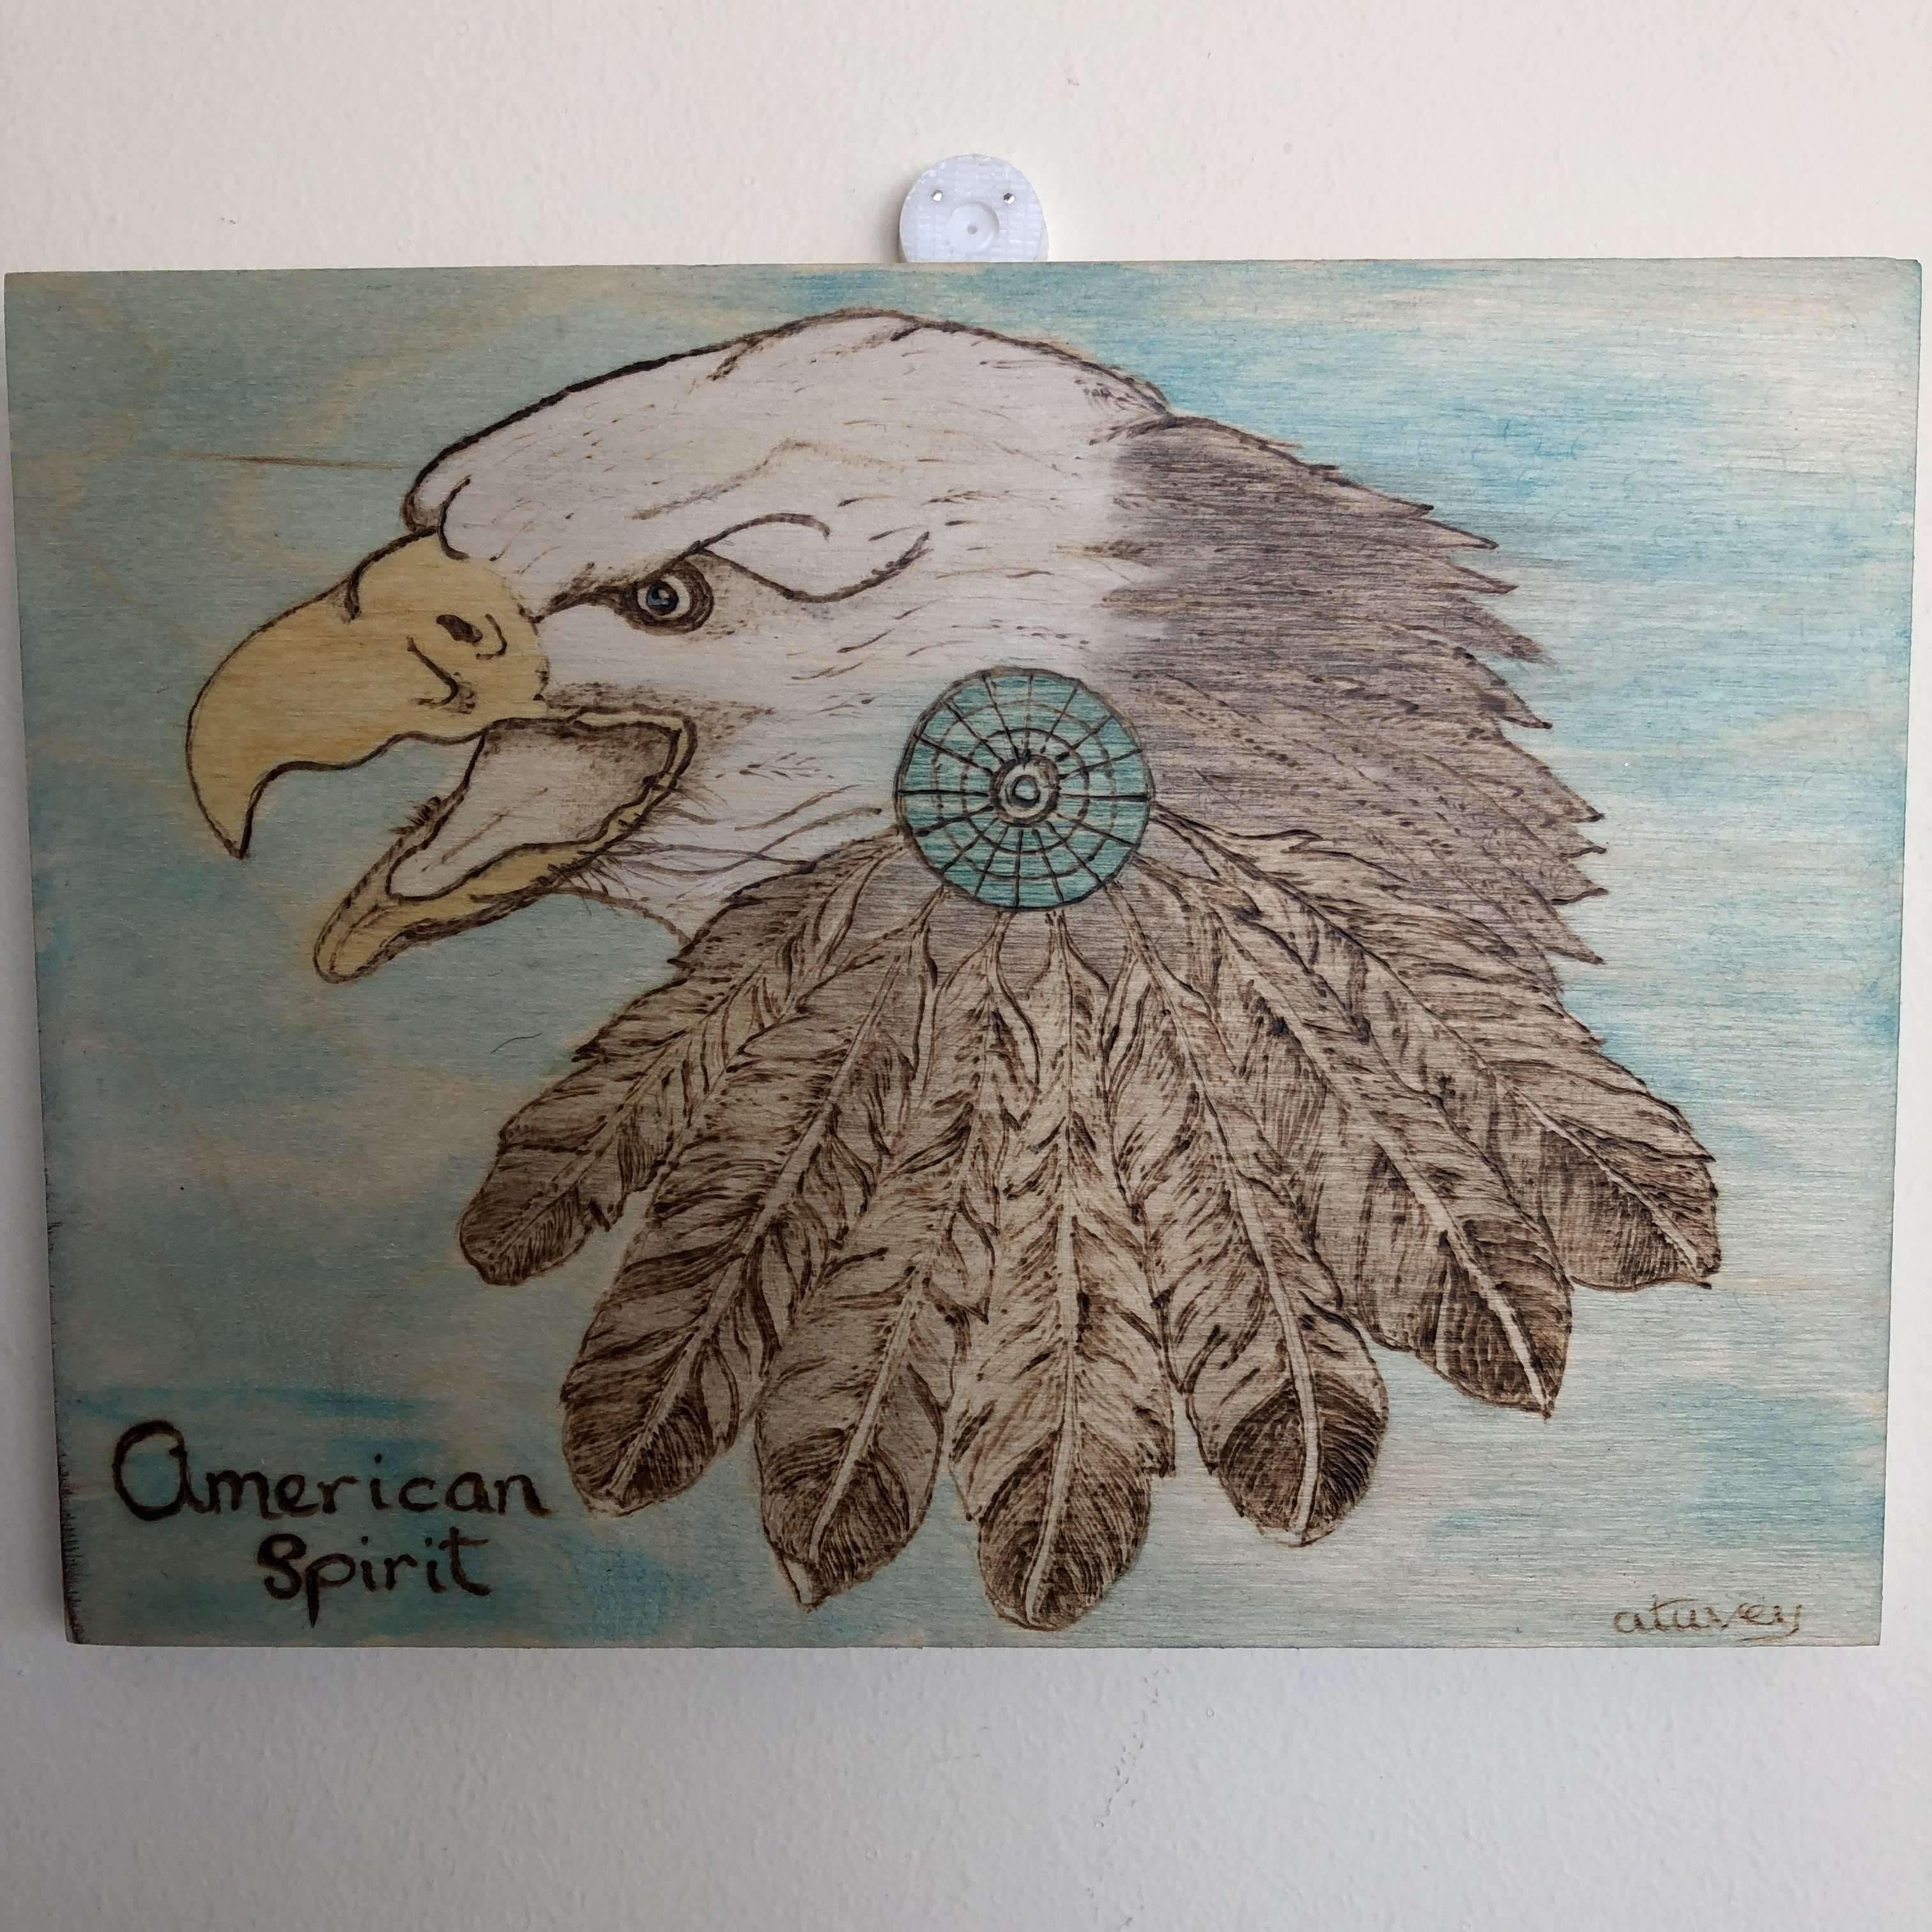 Red Berry Crafts Ltd:Pyrographed American Eagle "American Spirit" Engraved Picture